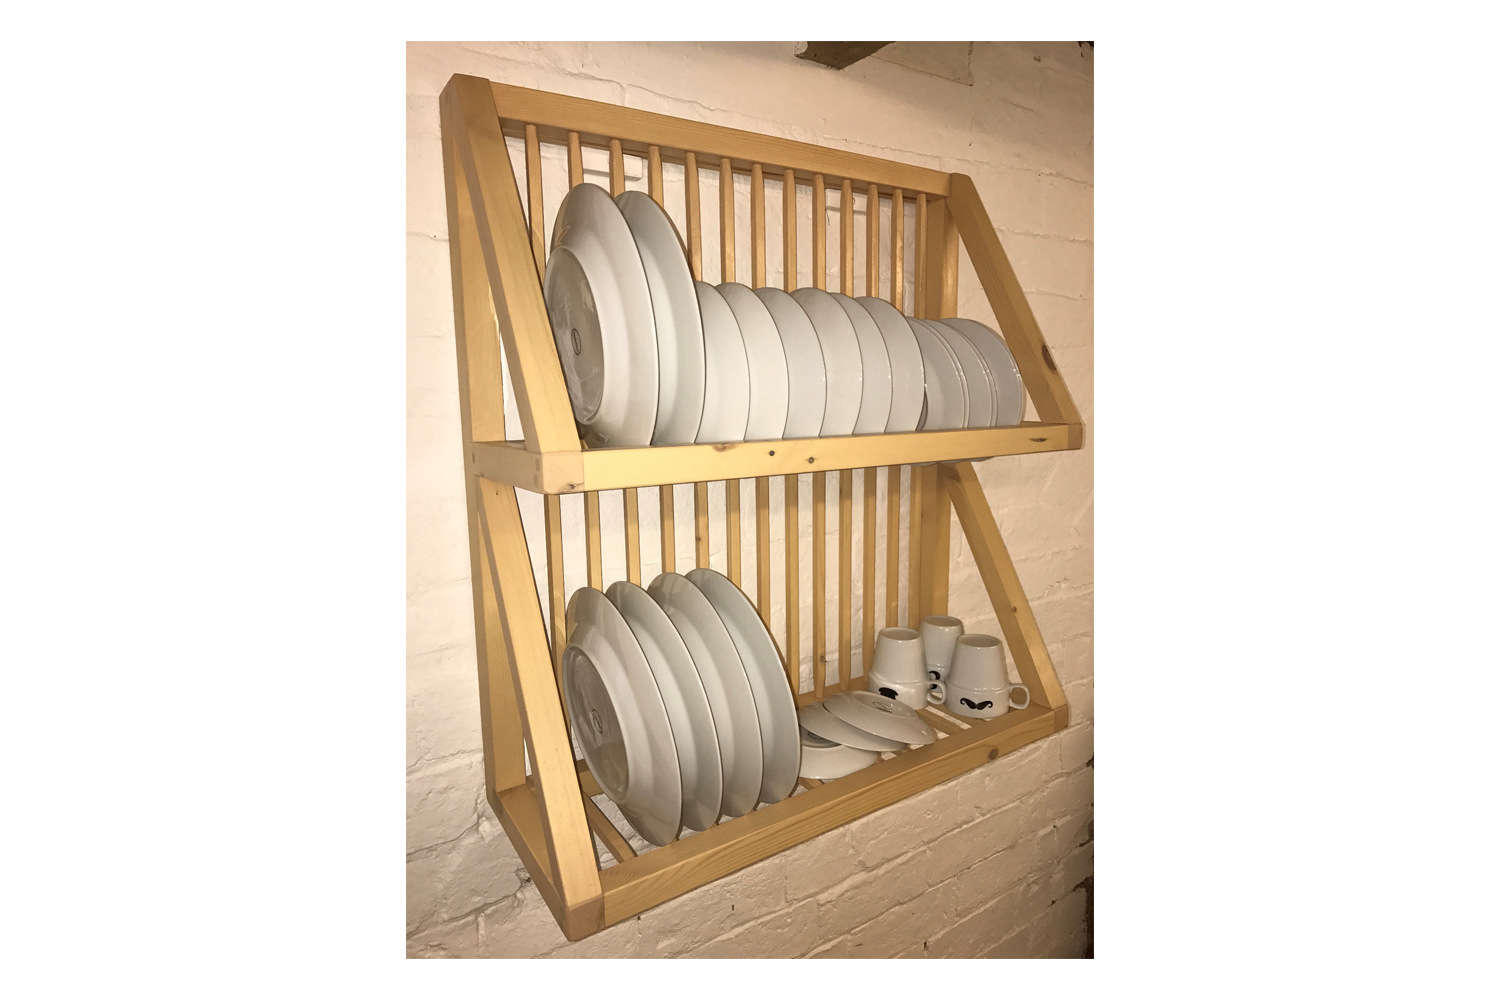 The Broadway Plate Rack by The Plate Rack Co. comes in pine, oak, or painted wood; £285.00 to £365.00.